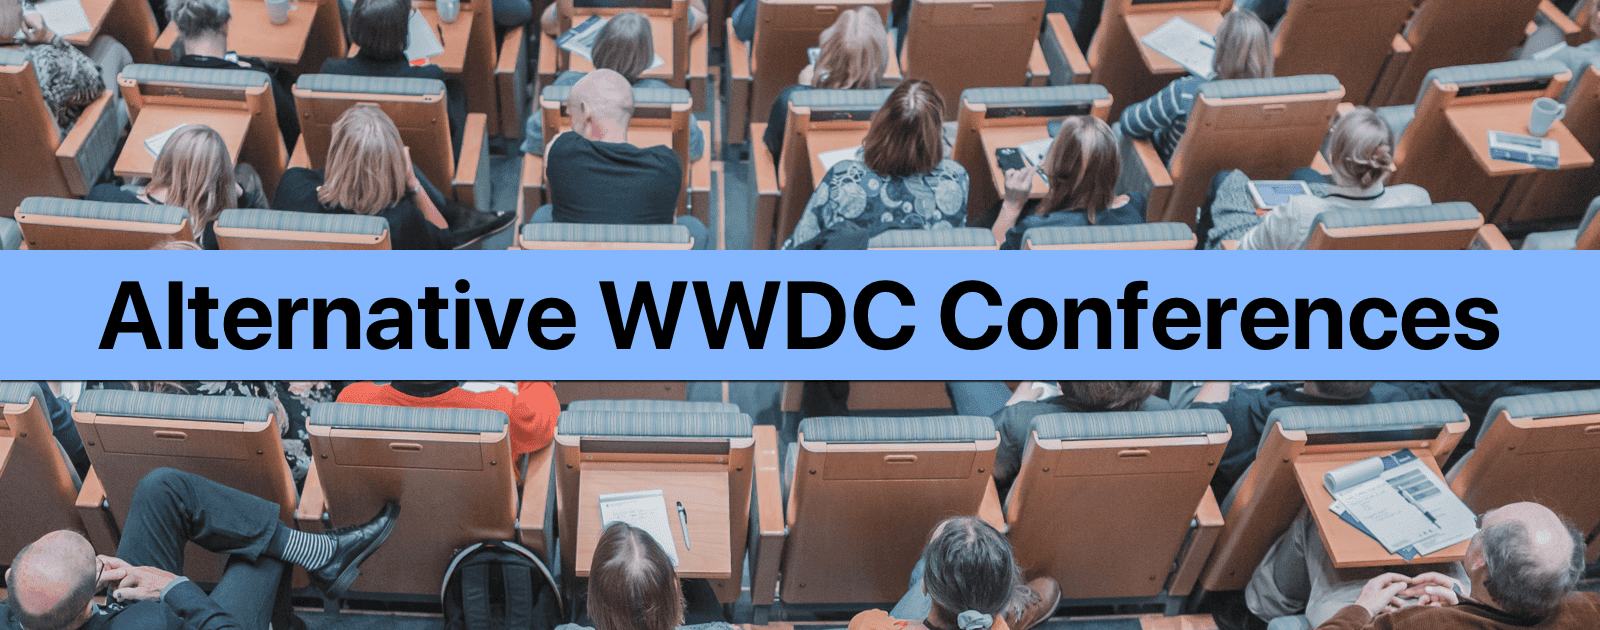 Alternative WWDC Conferences You’ll Want to Know About